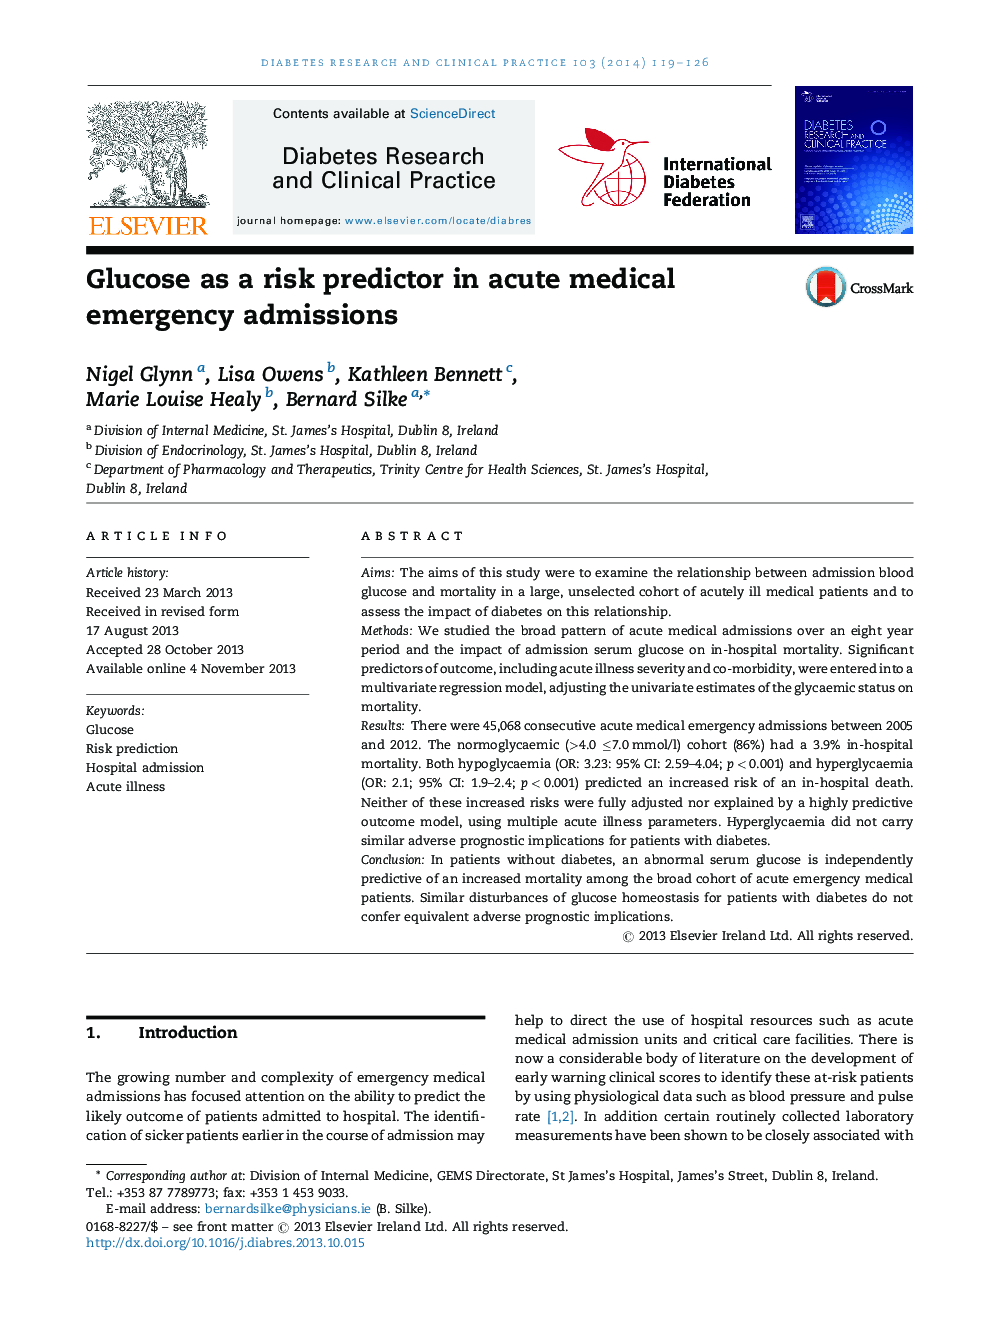 Glucose as a risk predictor in acute medical emergency admissions